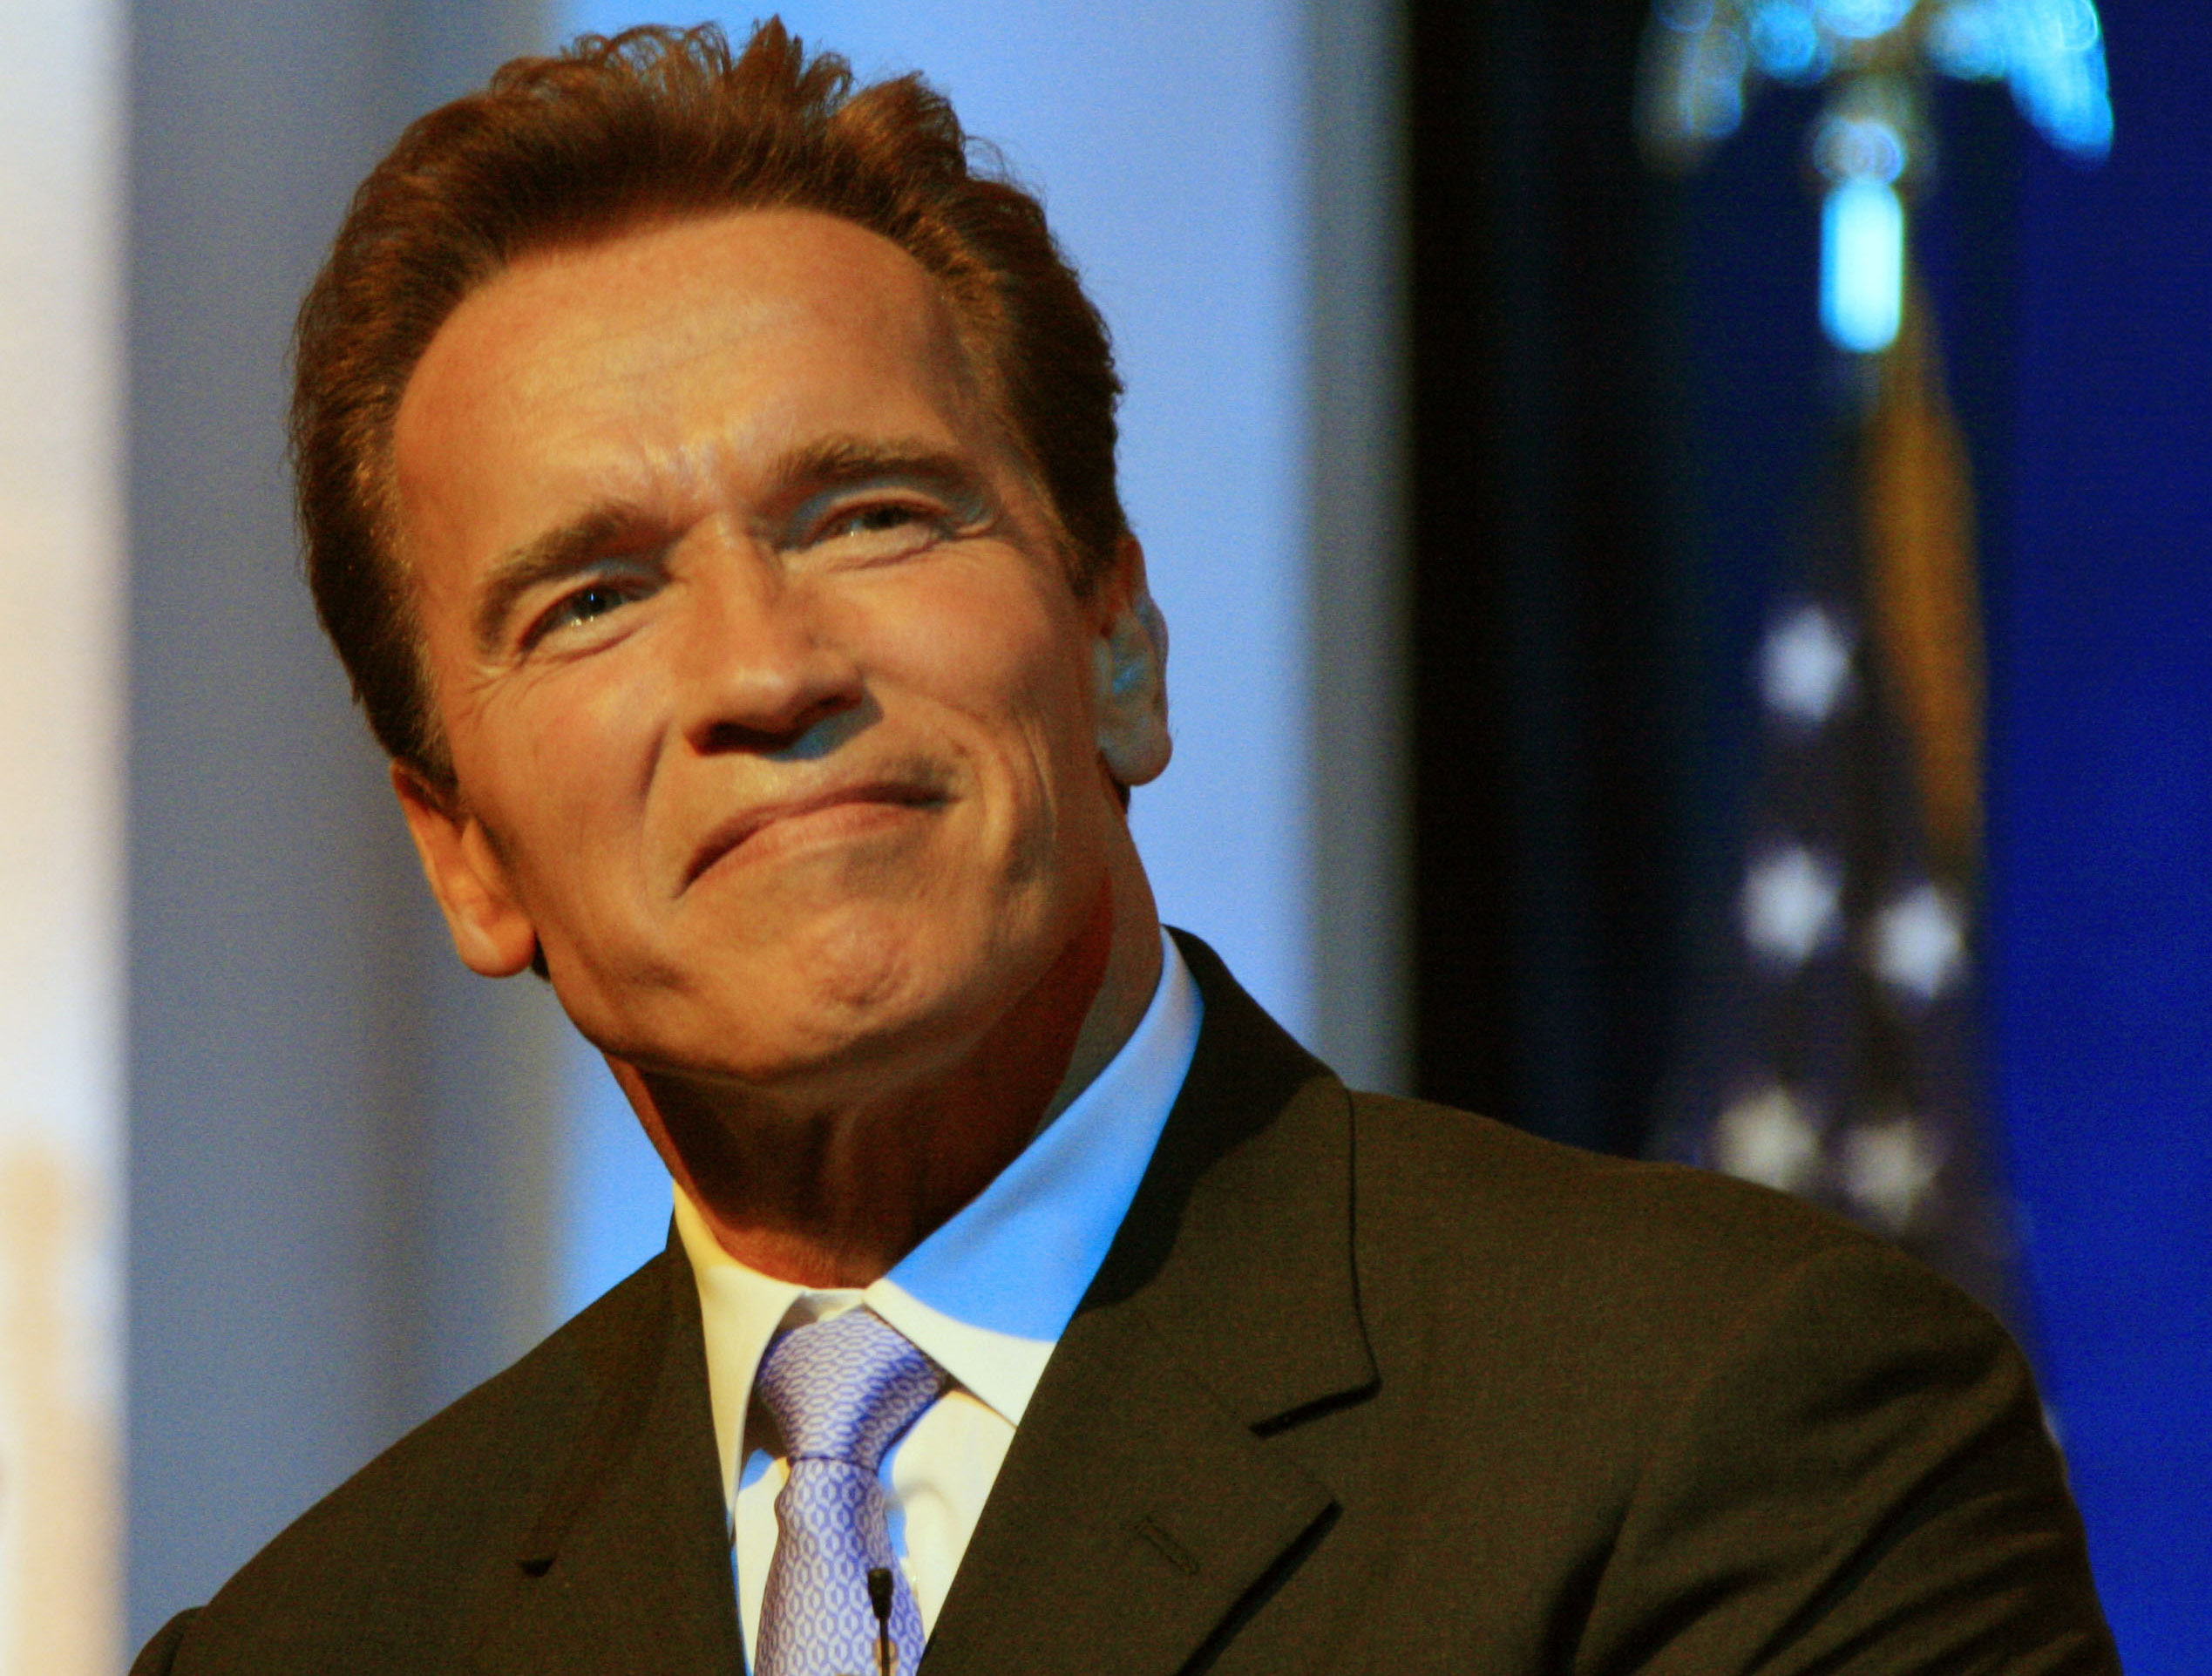 Arnold Schwarzenegger wearing suit and tie with American flag in the background